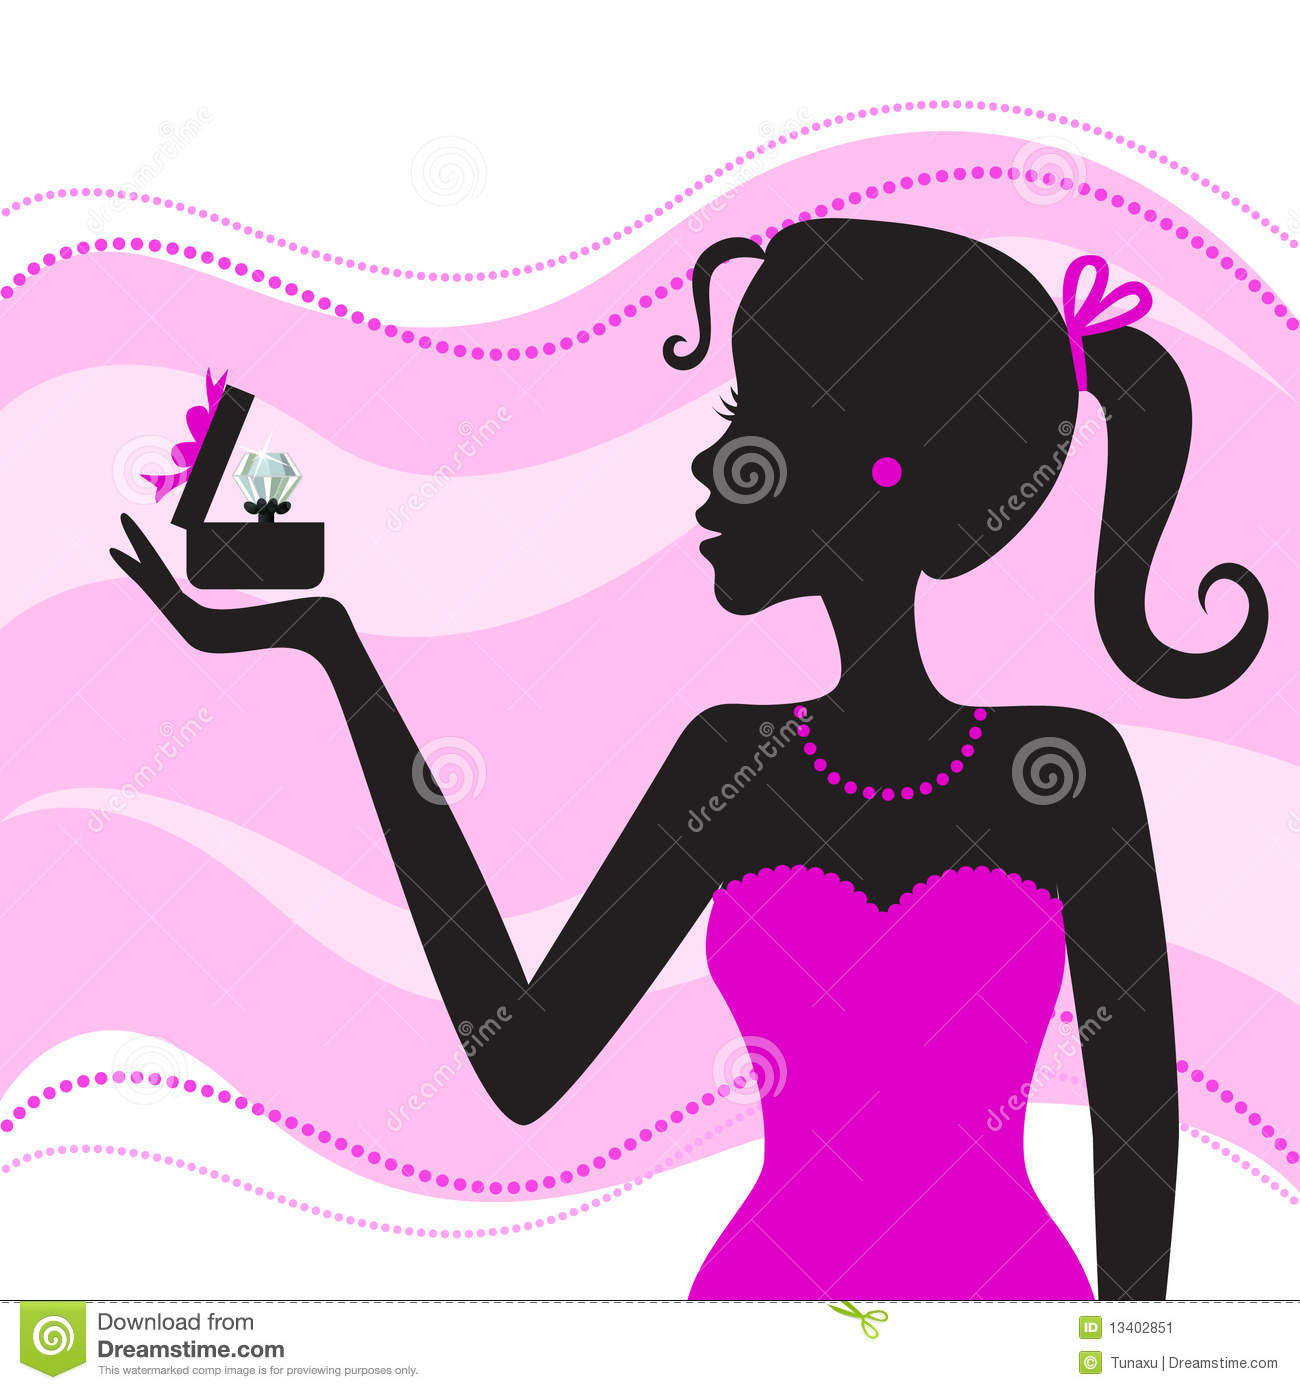 Women With Jewelry Stock Image   Image  13402851